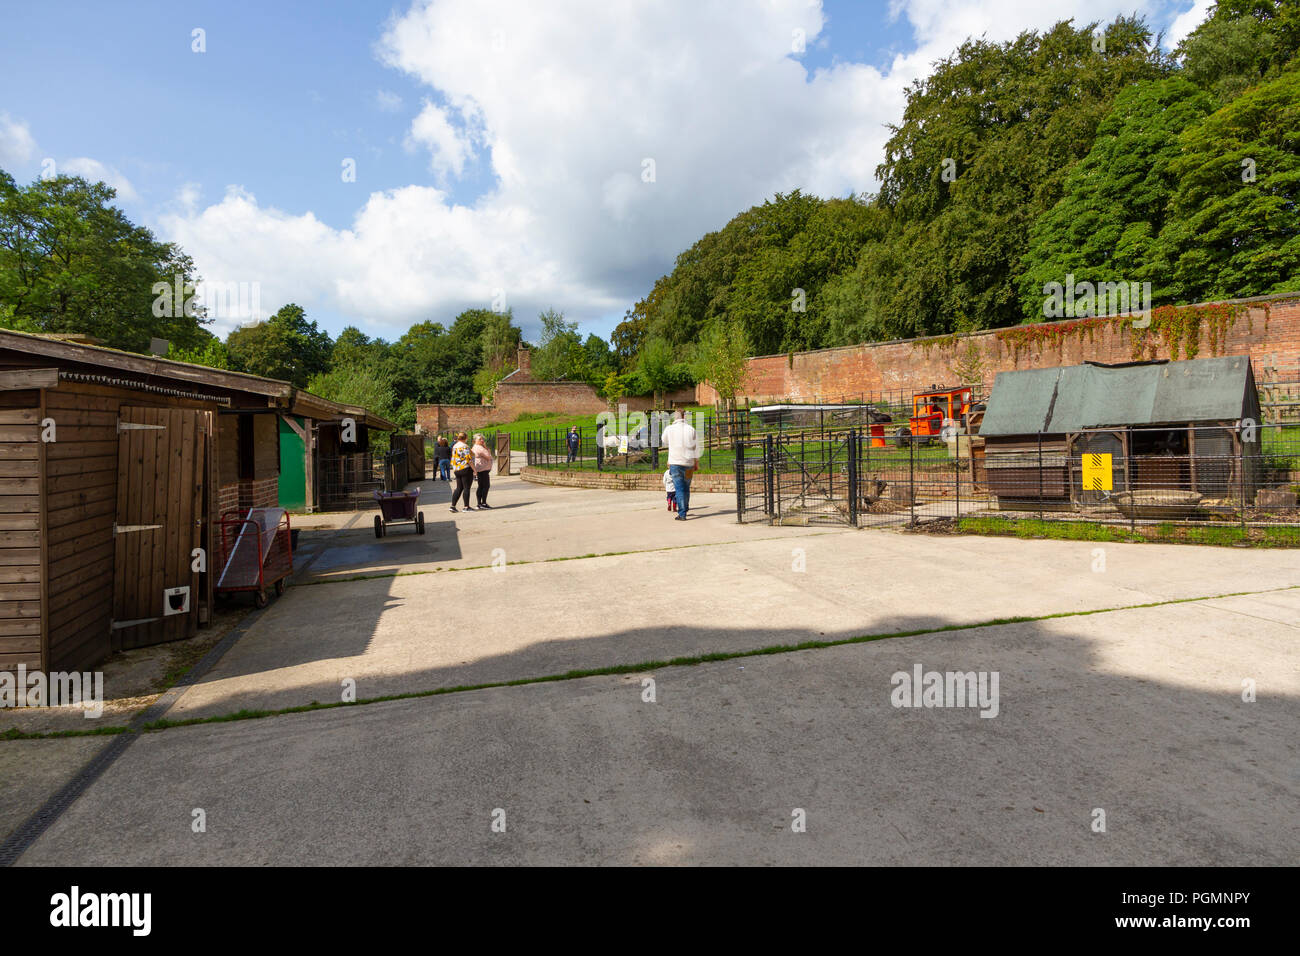 The Stables Animal Centre in Heaton Park, Prestwich, England. Stock Photo